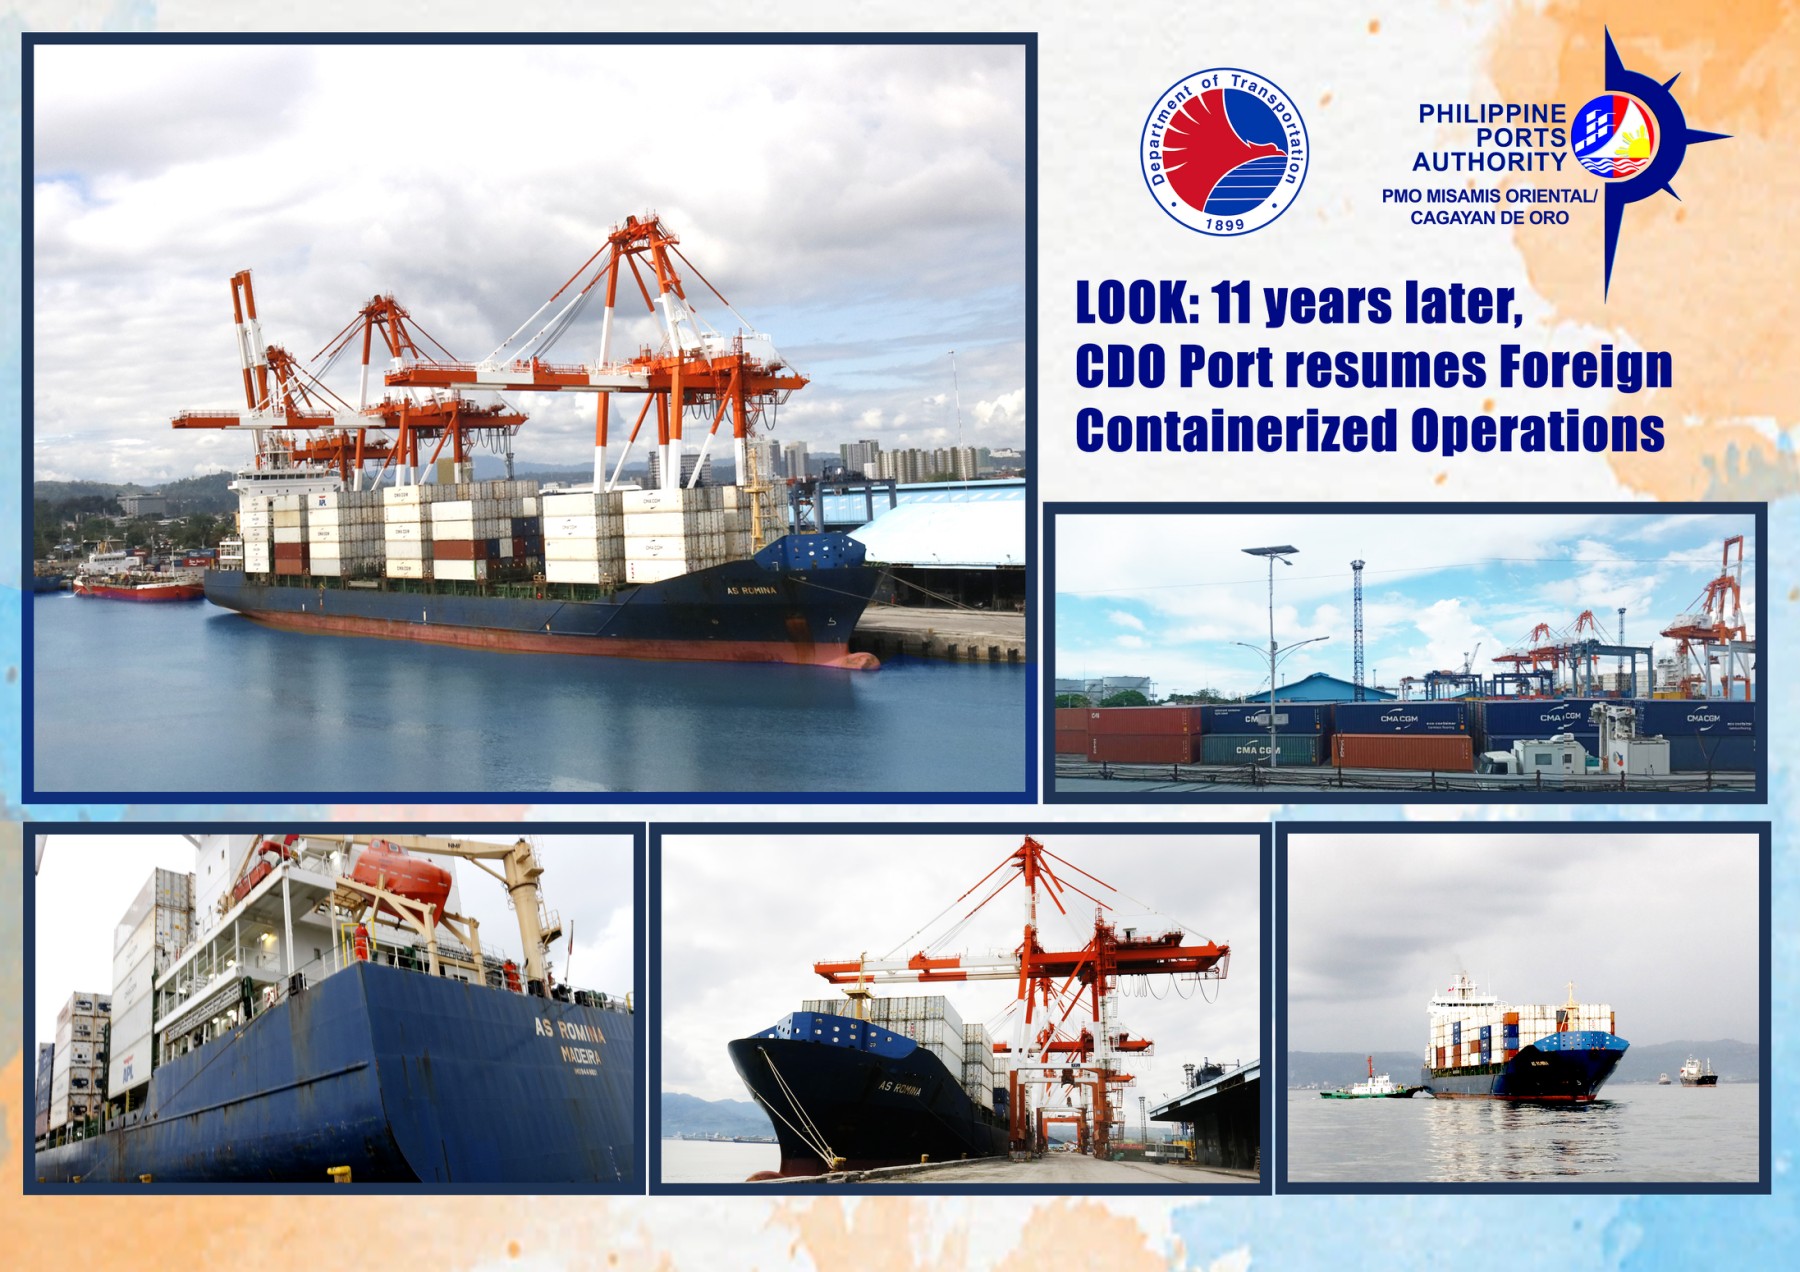 Ontkennen Zeeanemoon Ben depressief LOOK: 11 years later, CDO Port resumes Foreign Containerized Operations -  PPA PMO Misamis Oriental / Cagayan de Oro